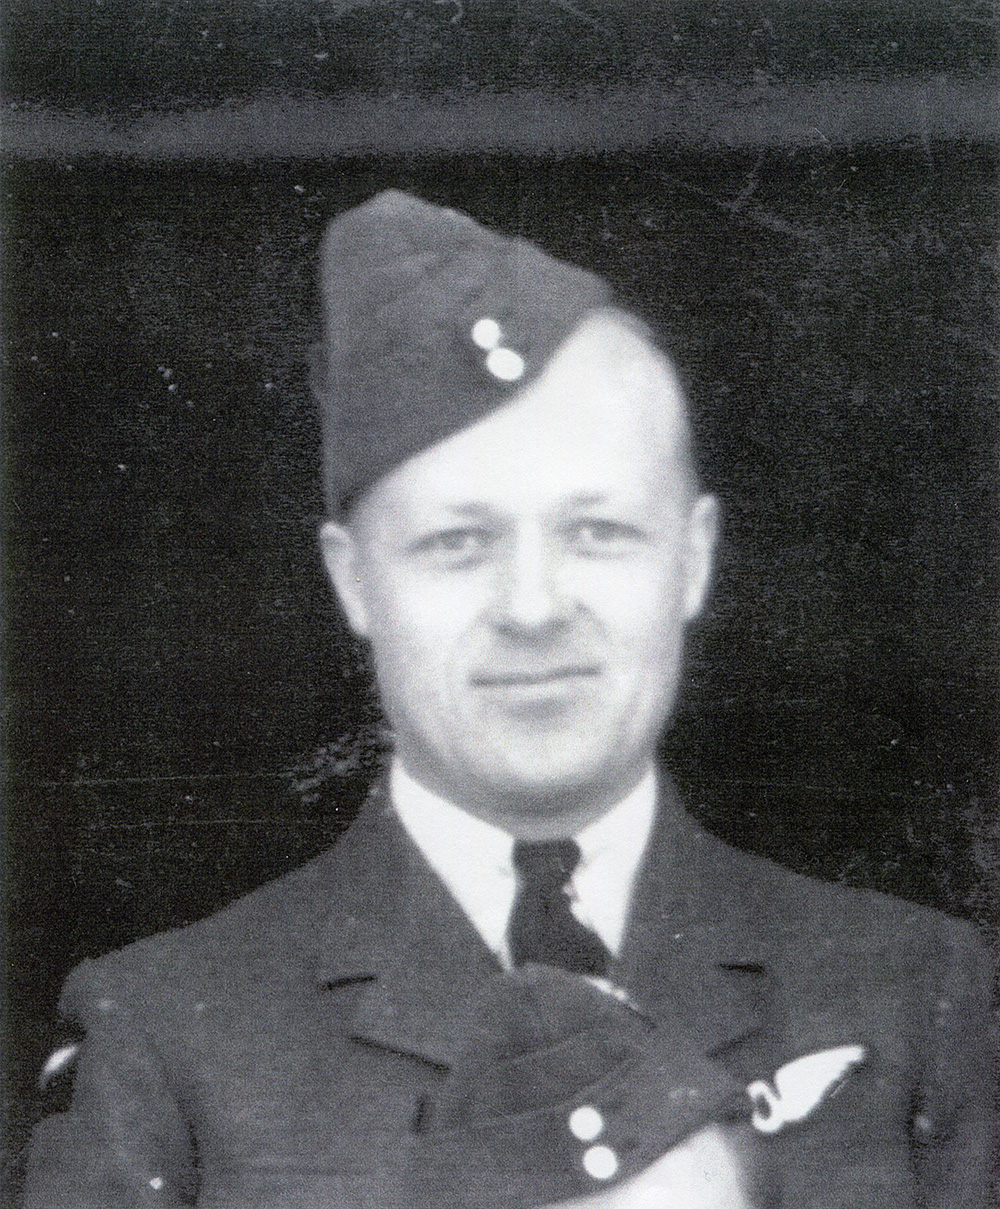 A black and white grainy photograph of a soldier wearing a Royal Canadian Airforce uniform smiling at the camera.